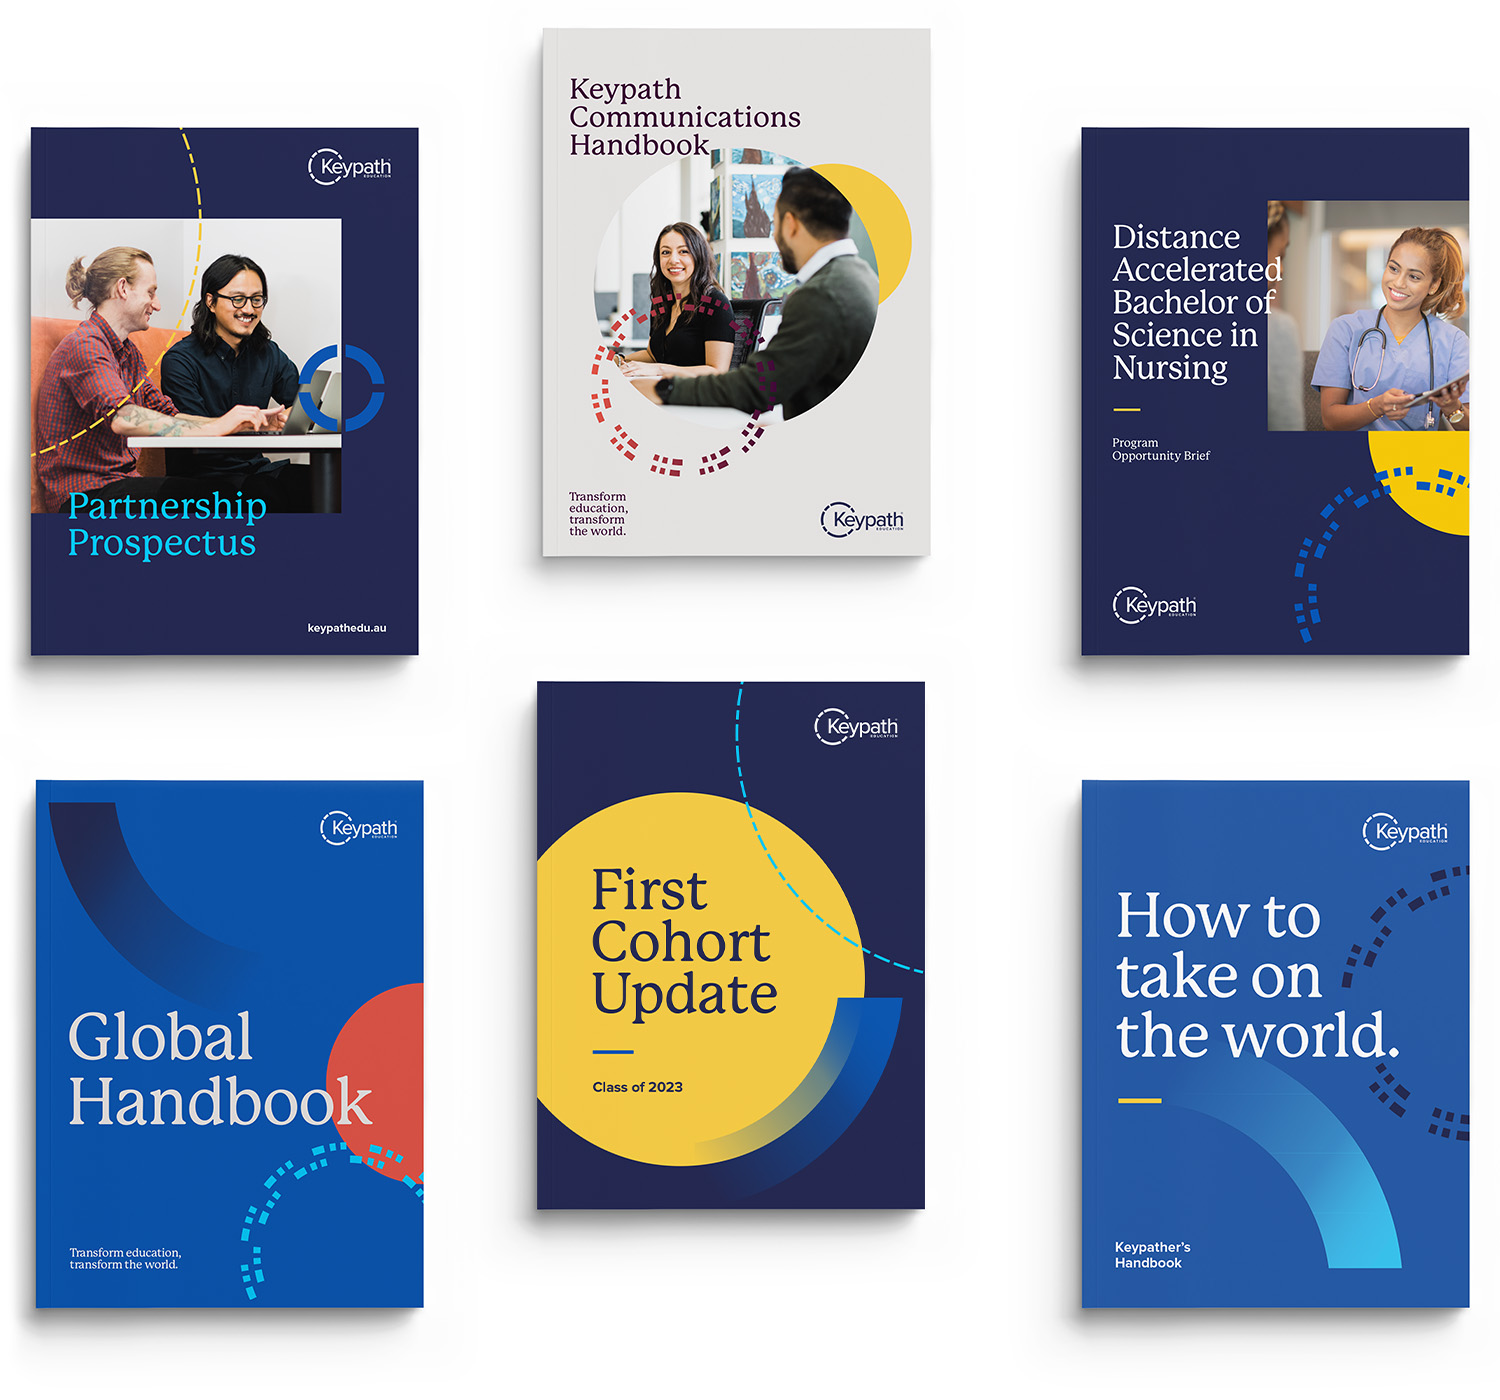 6 brochure covers with different designs for various Keypath Education publications.